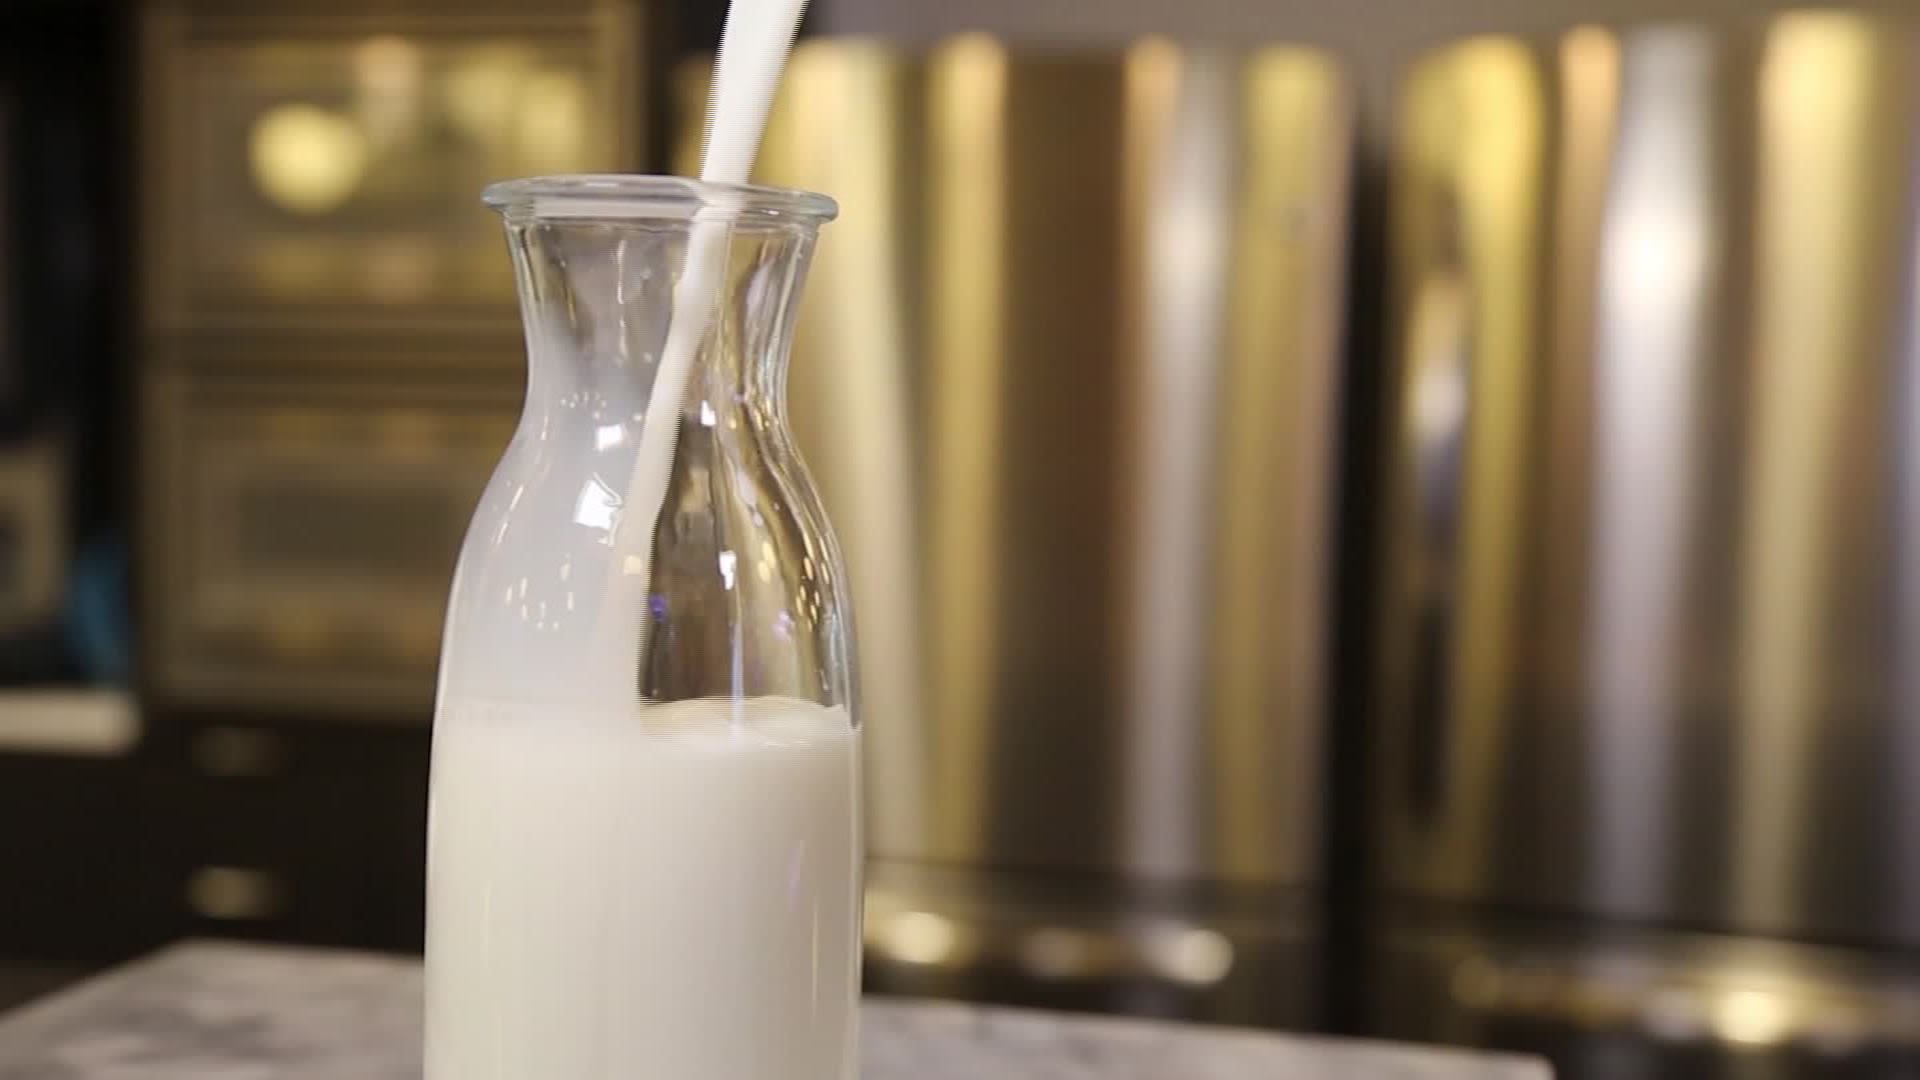 Skimmed Milk More Hydrating Than Water, Researchers Say